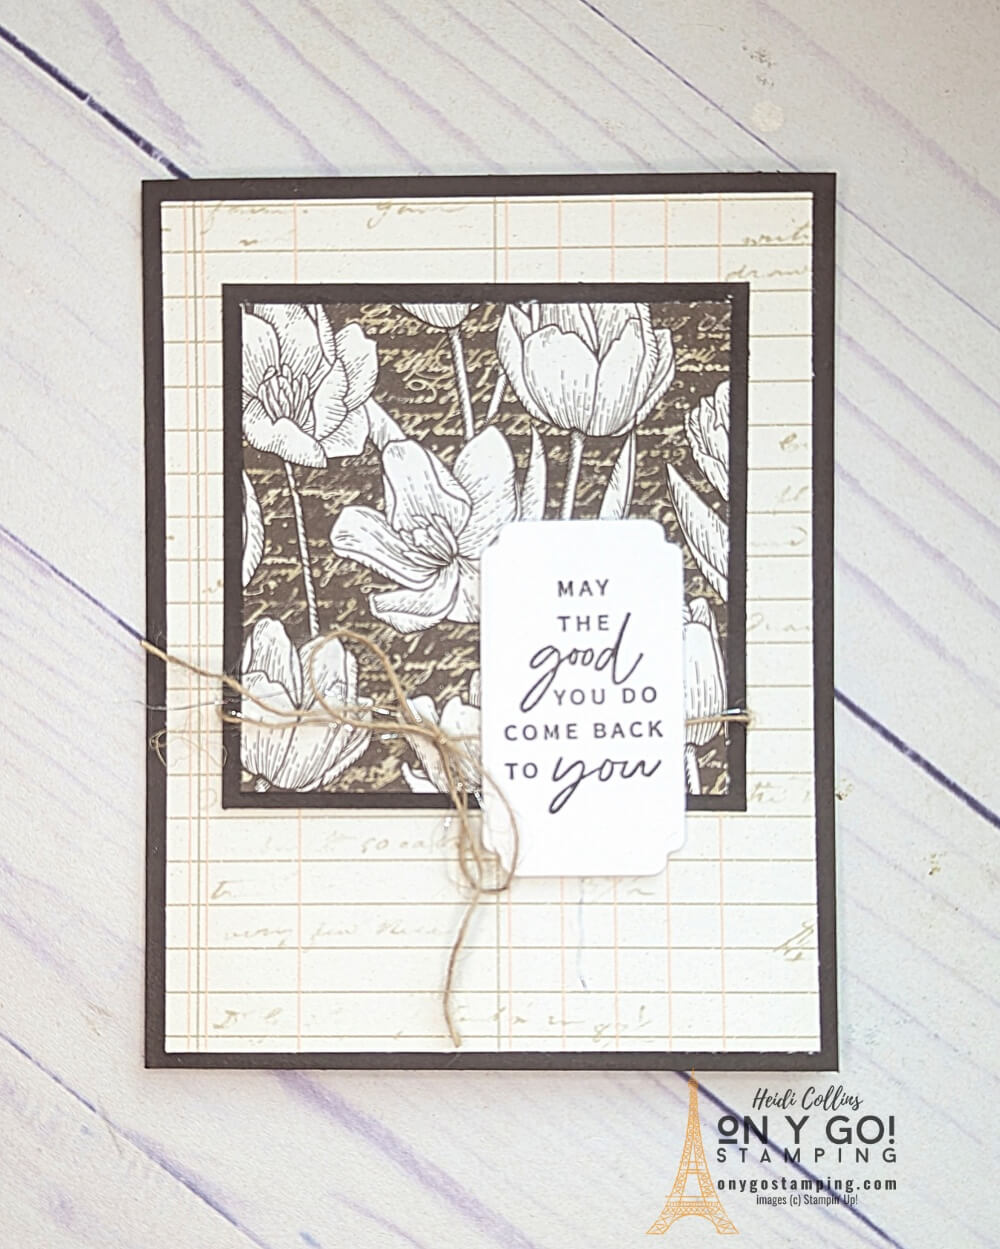 Beautiful handmade floral card using the Abigail Rose Designer Series Paper from Stampin' Up! This quick and easy card is based on a simple card sketch.